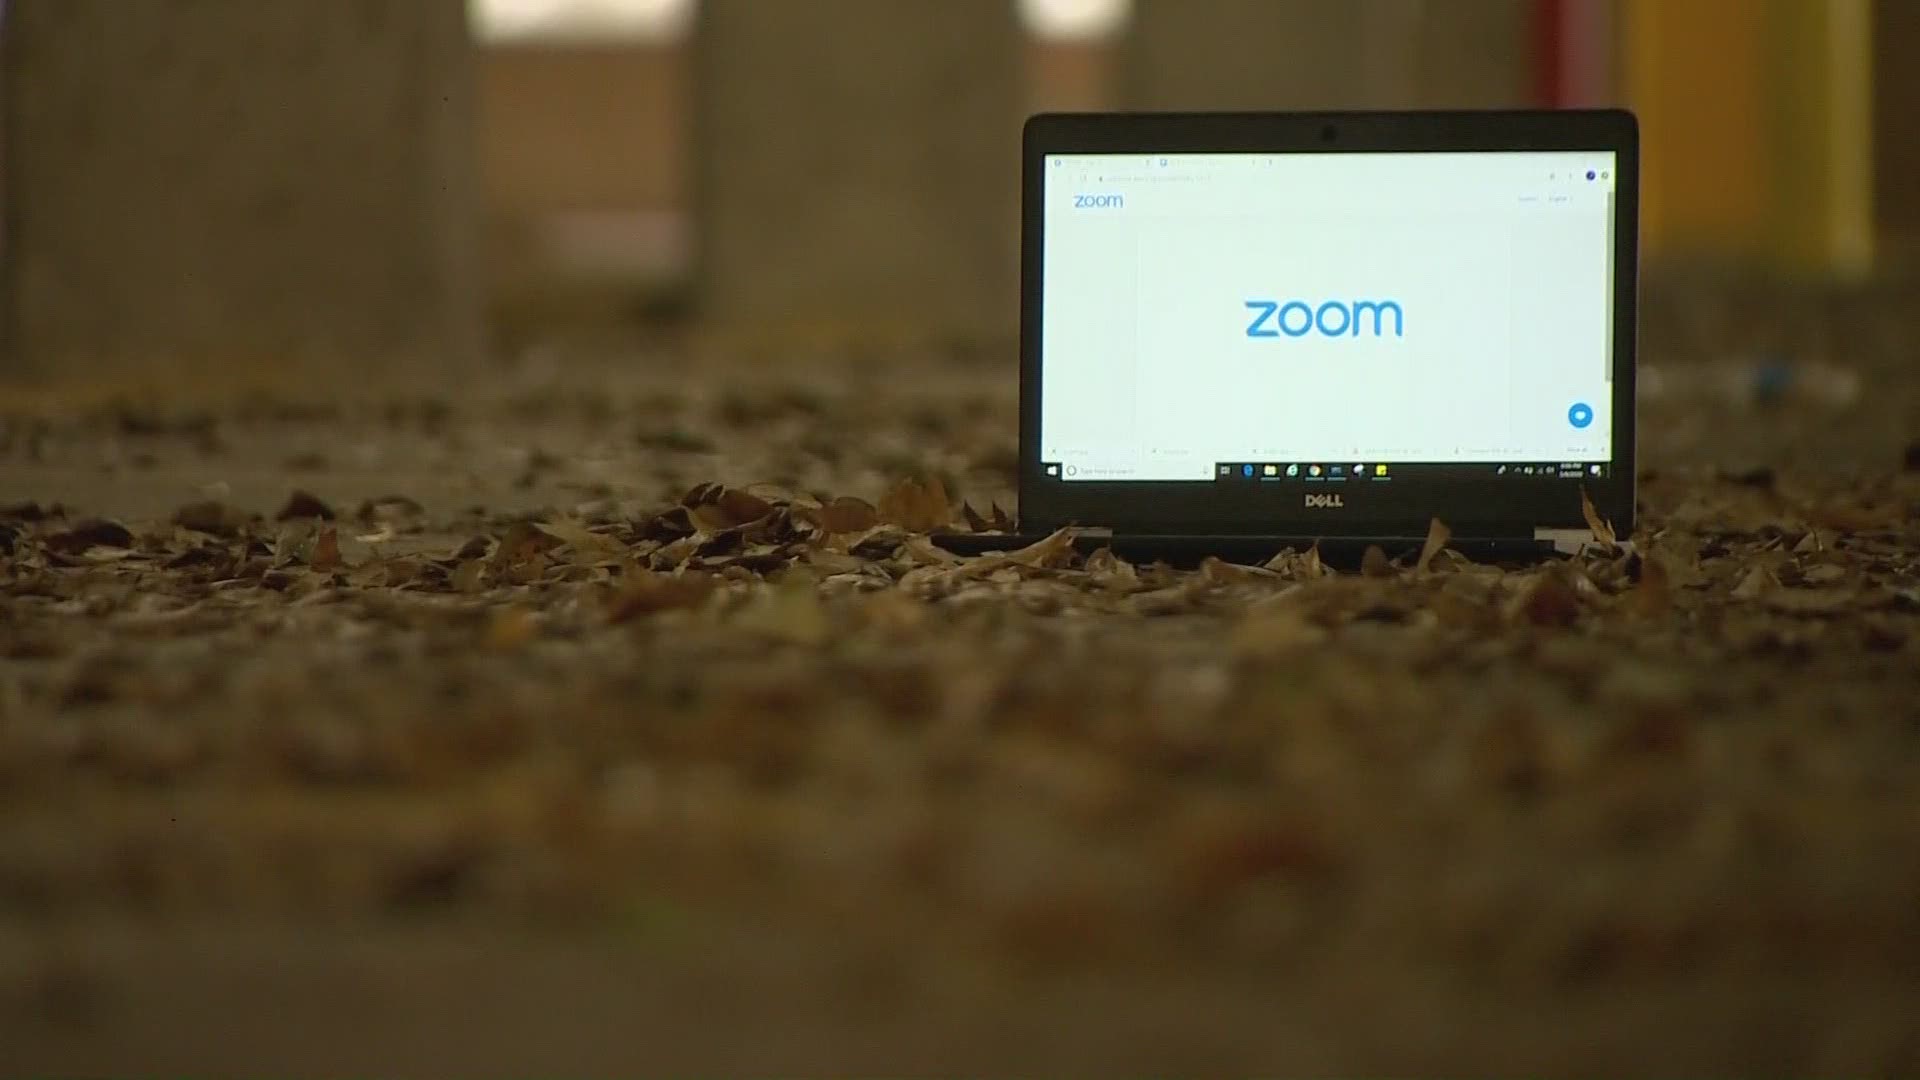 Dallas Isd Zoom Call Hacked With Child Porn Image Wfaa